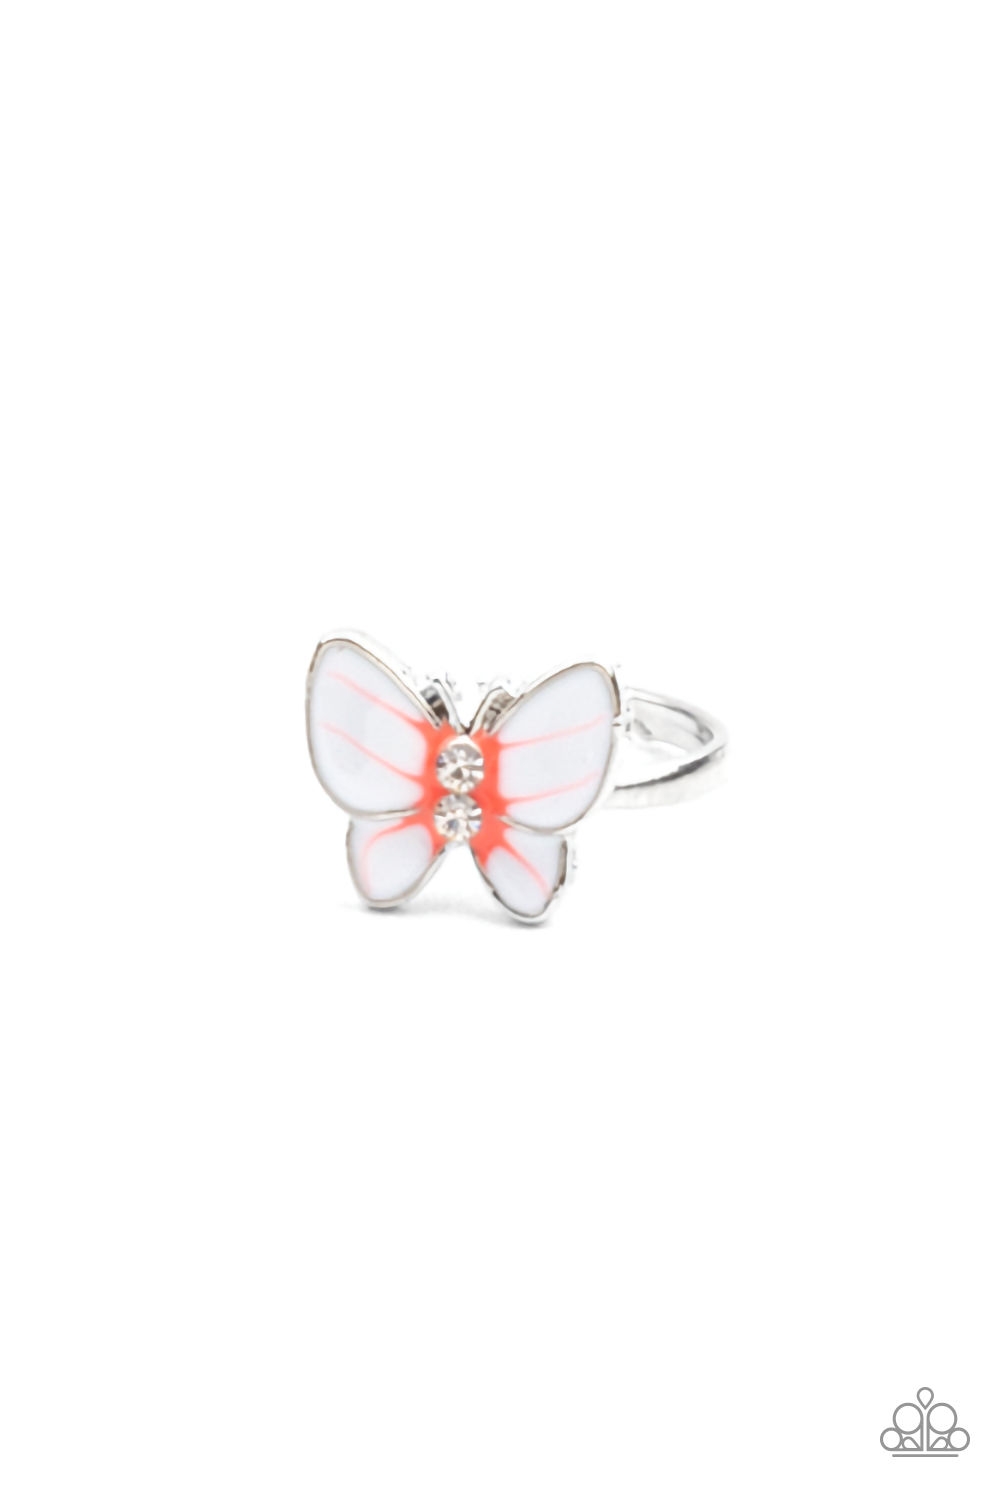 Ring - Starlet Shimmer 2 Rhinestone Butterfly - Coral